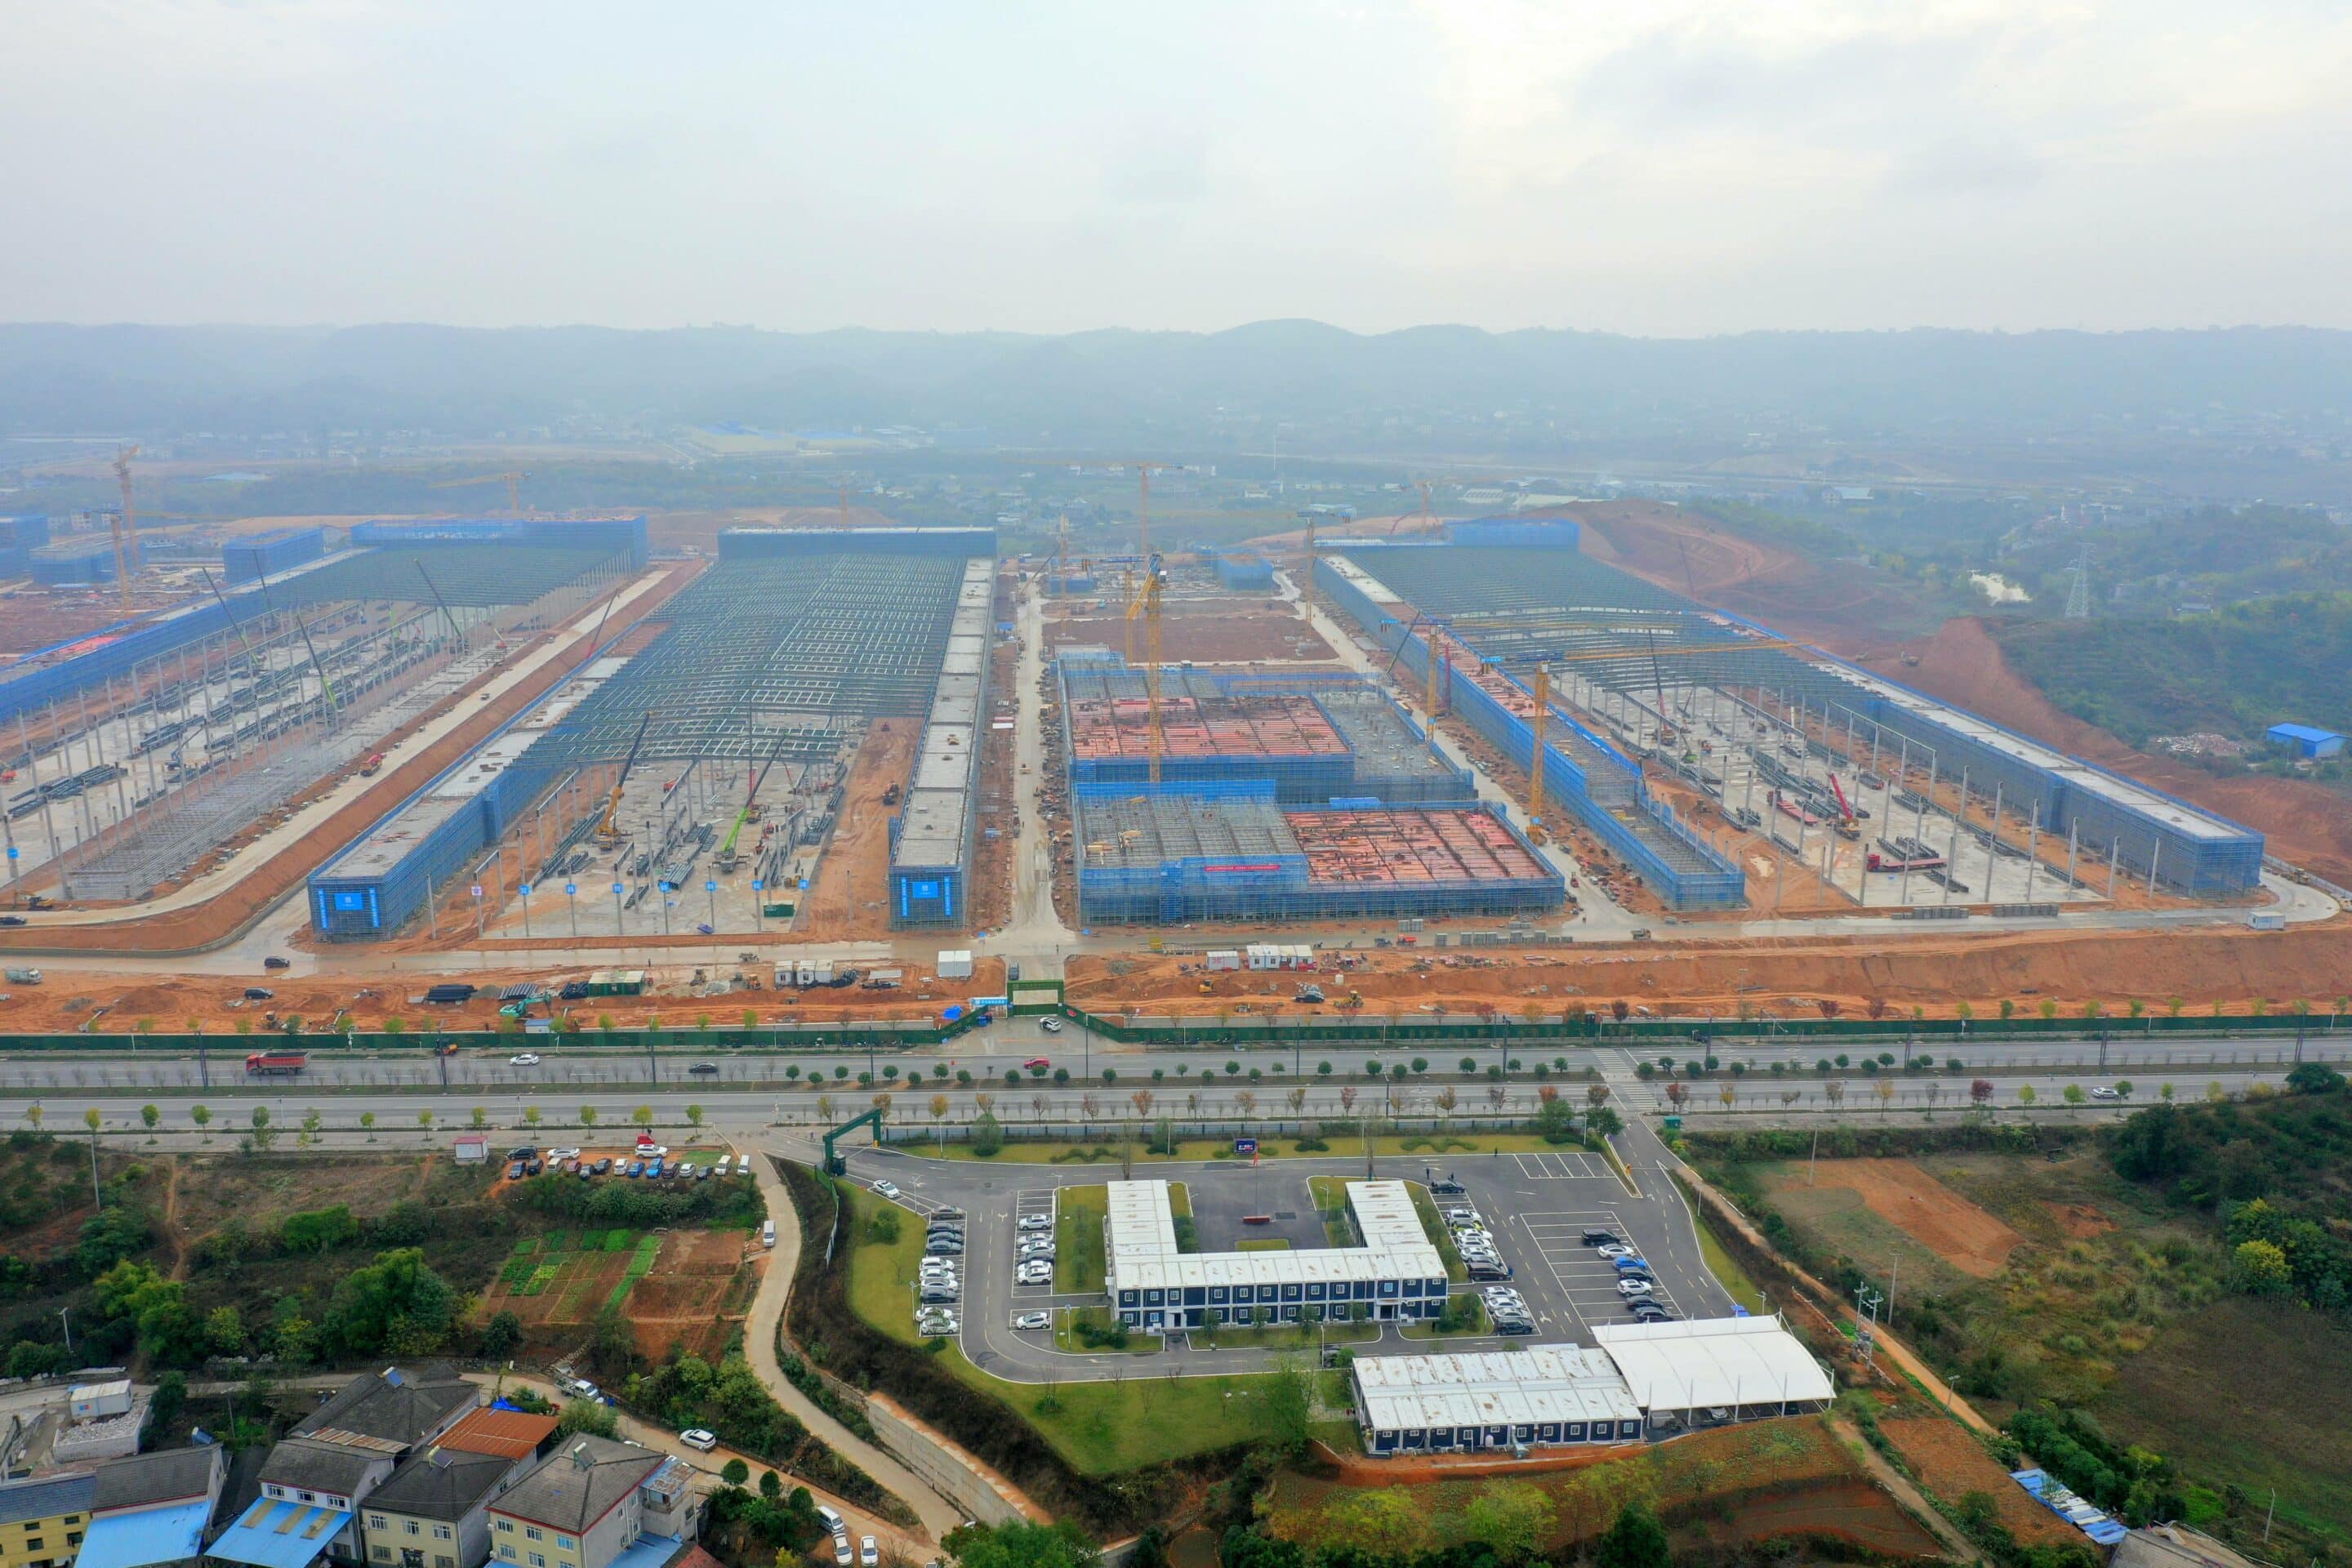 YICHANG, CHINA - NOVEMBER 23, 2022 - Aerial photo shows large engineering vehicles at the site of the Chuneng New Energy (Yichang) lithium battery Industrial Park project in Yichang, Hubei Province, China, Nov 23, 2022. It is understood that the total investment of Chuneng New Energy Source (Yichang) lithium battery Industrial Park project is 60 billion yuan, and the planned construction of 150GWh lithium battery capacity is divided into four phases, of which the first phase will build 40GWh capacity. It is expected to achieve an annual output value of 105 billion yuan, a tax revenue of 6 billion yuan, and 20,000 jobs. It will form a large-scale new energy lithium battery production base with an annual industrial output value of more than 100 billion yuan, integrating research and development, manufacturing and sales of power batteries, energy storage batteries, module packs and energy management systems. (Photo by CFOTO/Sipa USA)/42929015//2211231455